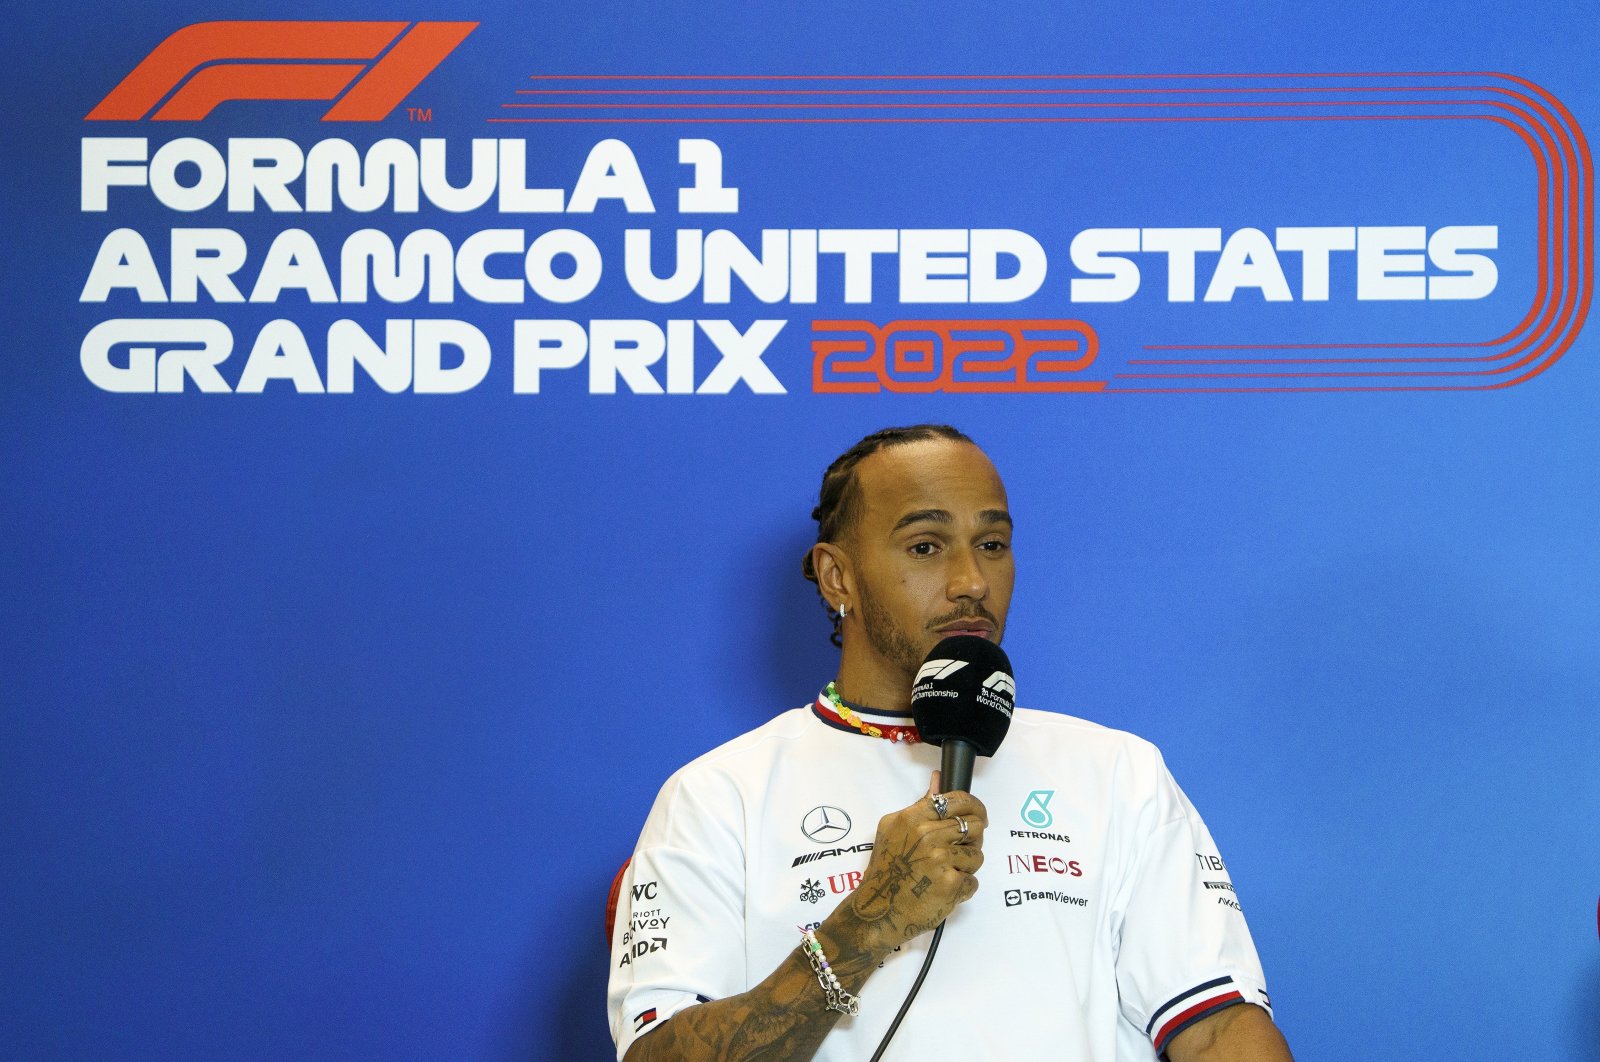 British Formula One driver Lewis Hamilton of Mercedes-AMG Petronas arrives for a press conference during the Formula One Grand Prix, Austin, Texas, U.S., Oct. 20, 2022. (EPA Photo)